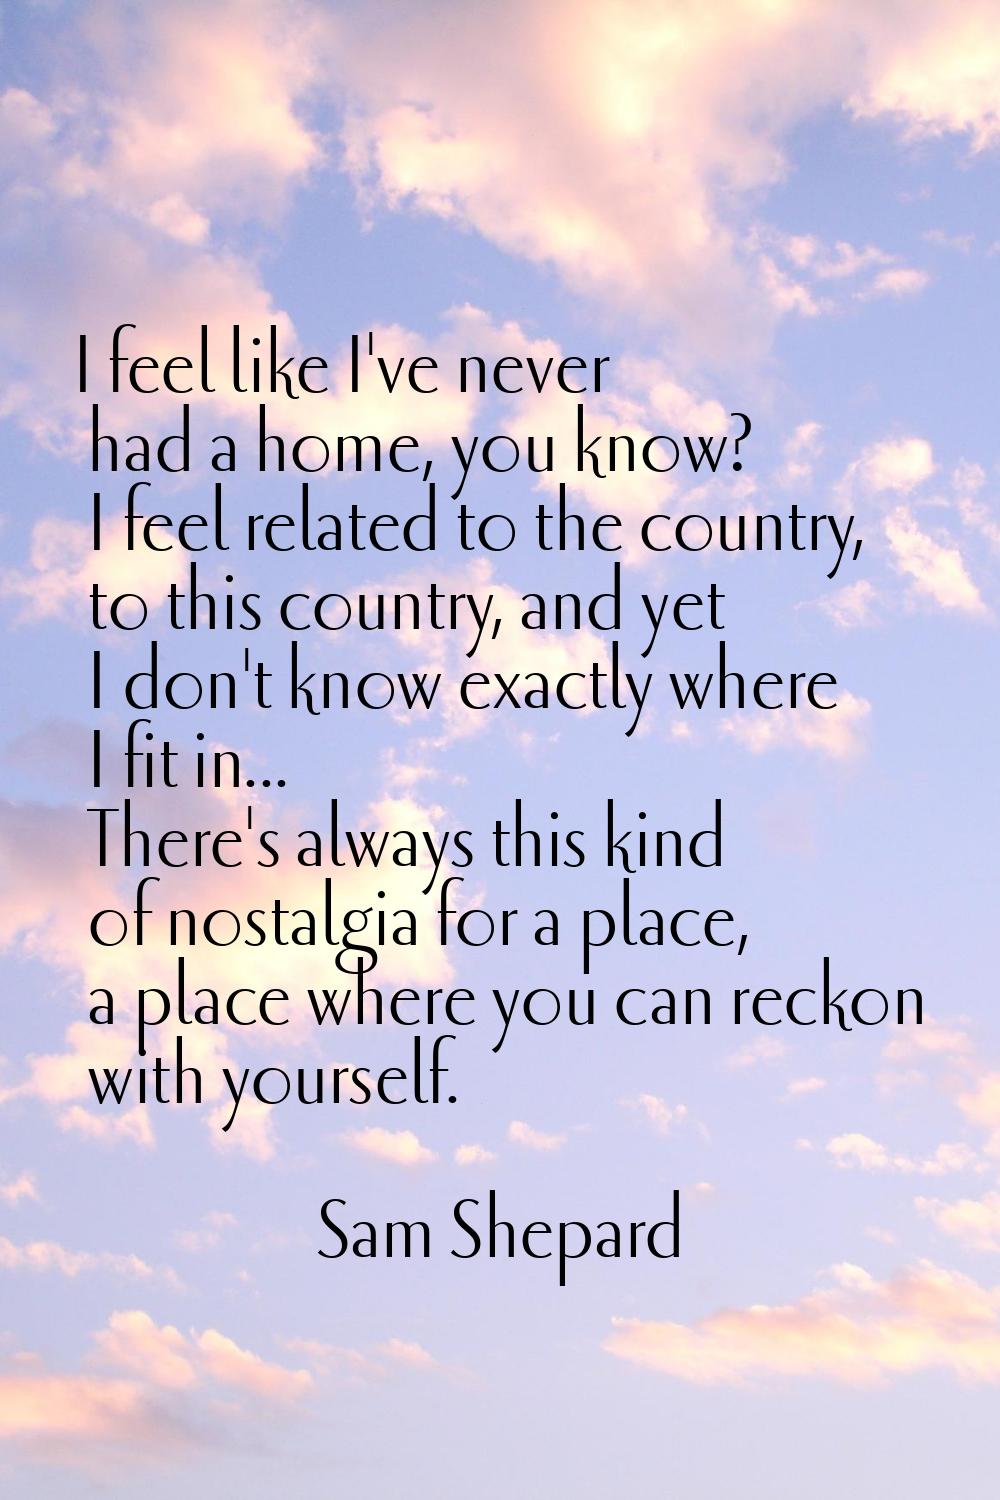 I feel like I've never had a home, you know? I feel related to the country, to this country, and ye